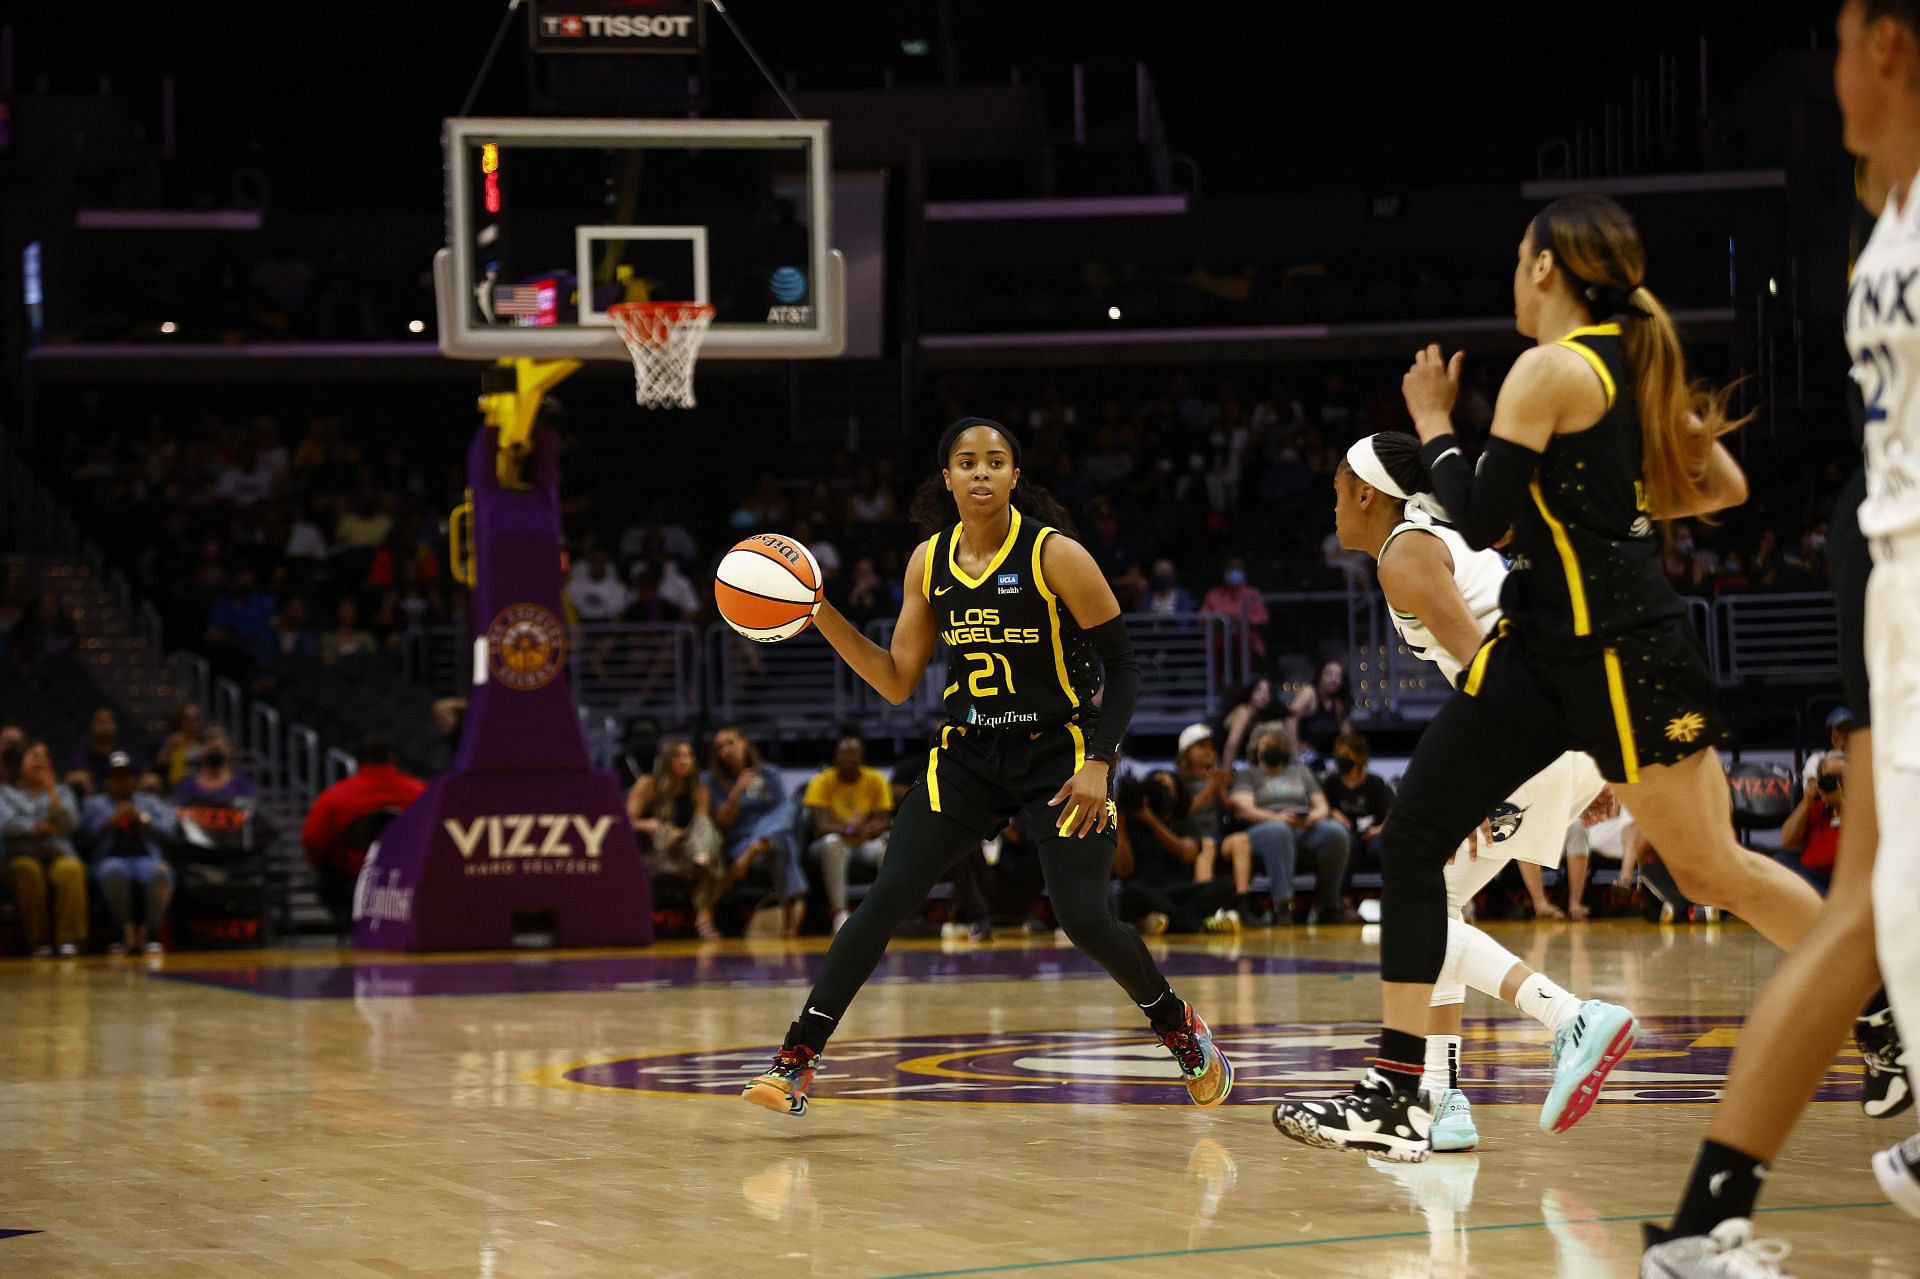 The Los Angeles Sparks take on the New York Liberty on Tuesday.